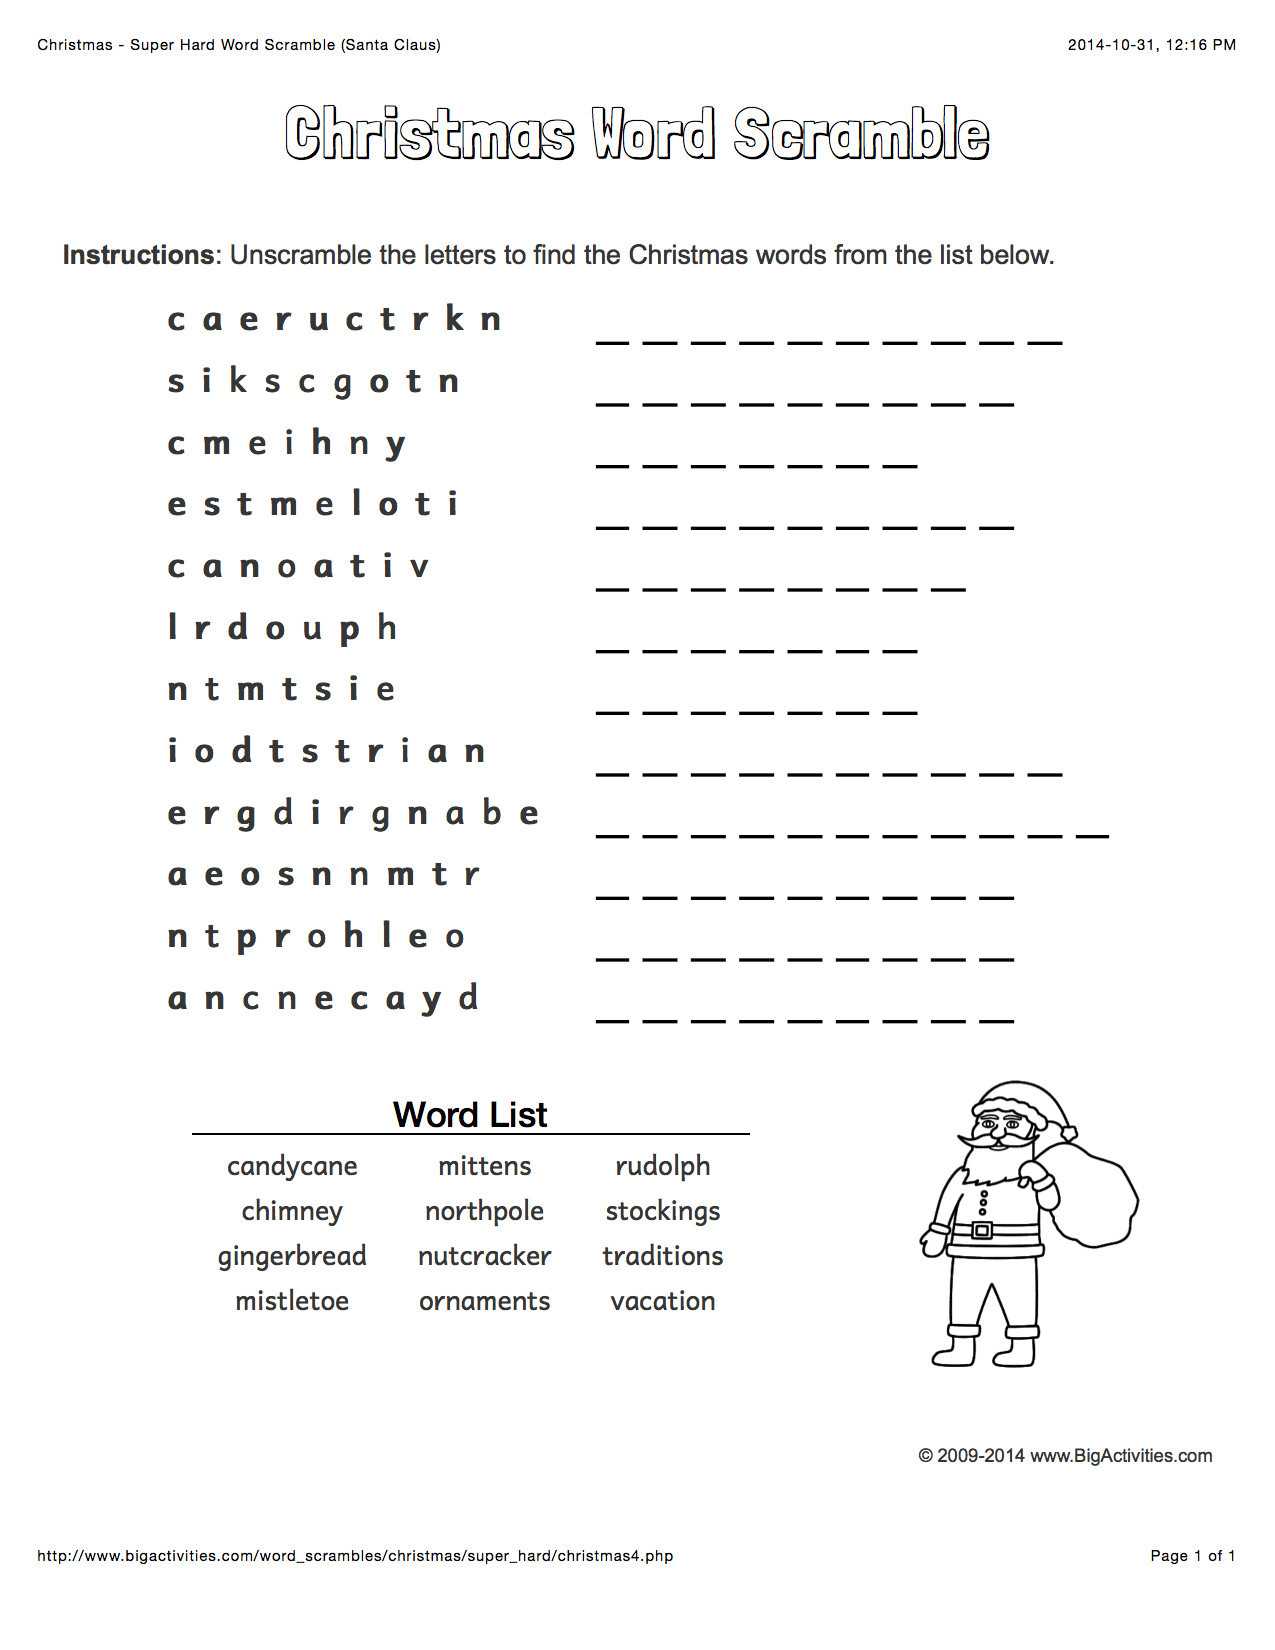 Unscramble Sentences Worksheets 1st Grade Together With Spanish Writing Prompts For 1st